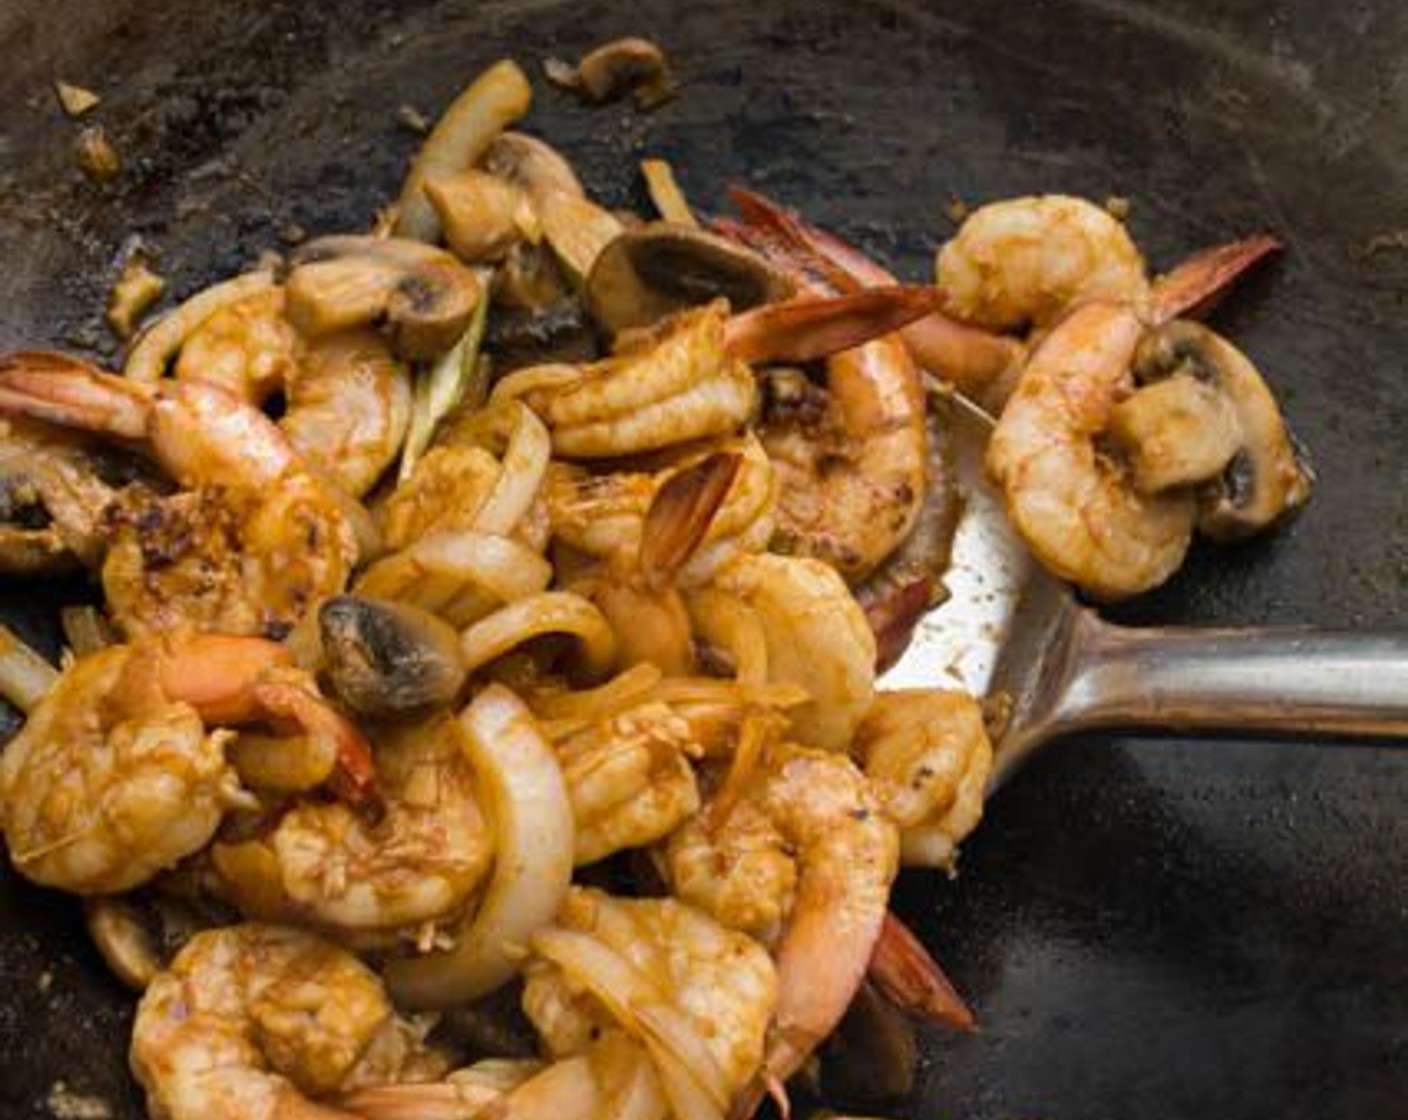 step 8 Stir-fry the shrimp, combining it with the other ingredients, for another minute or until fully cooked.